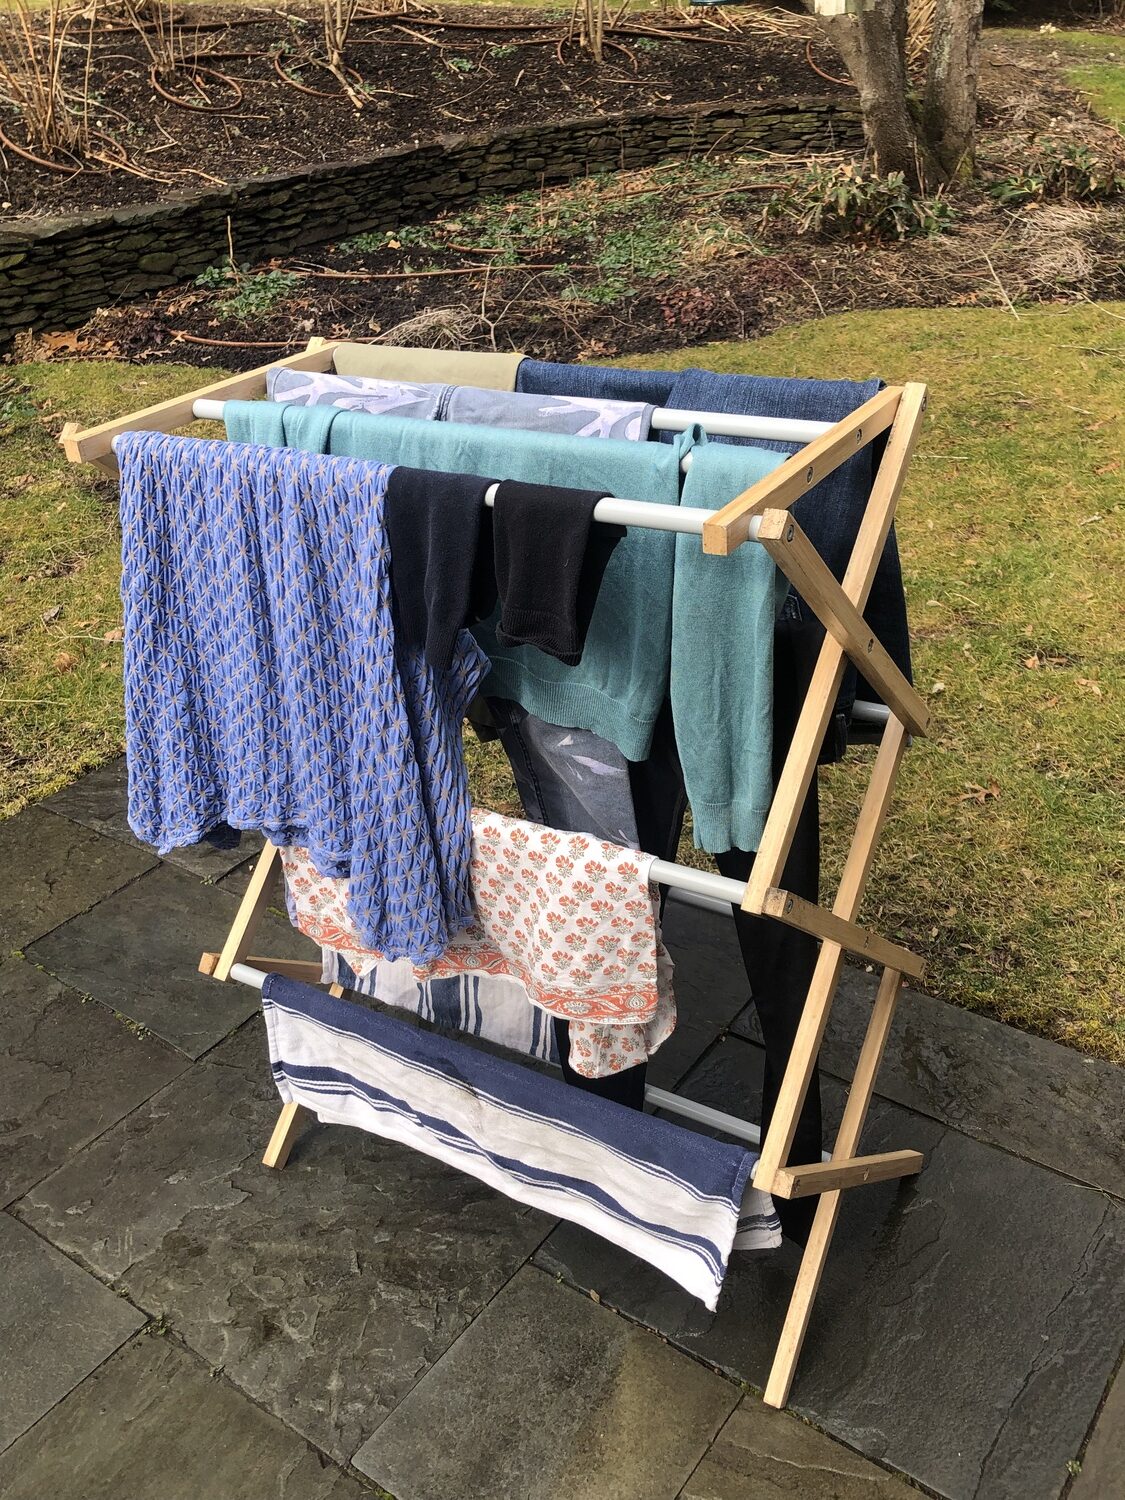 As the weather warms, skip the energy intensive dryer and let that spring wind air-dry your clothes. picking up the fresh, clean smell of springtime. It also prolongs the life of your clothes and saves money. JENNY NOBLE